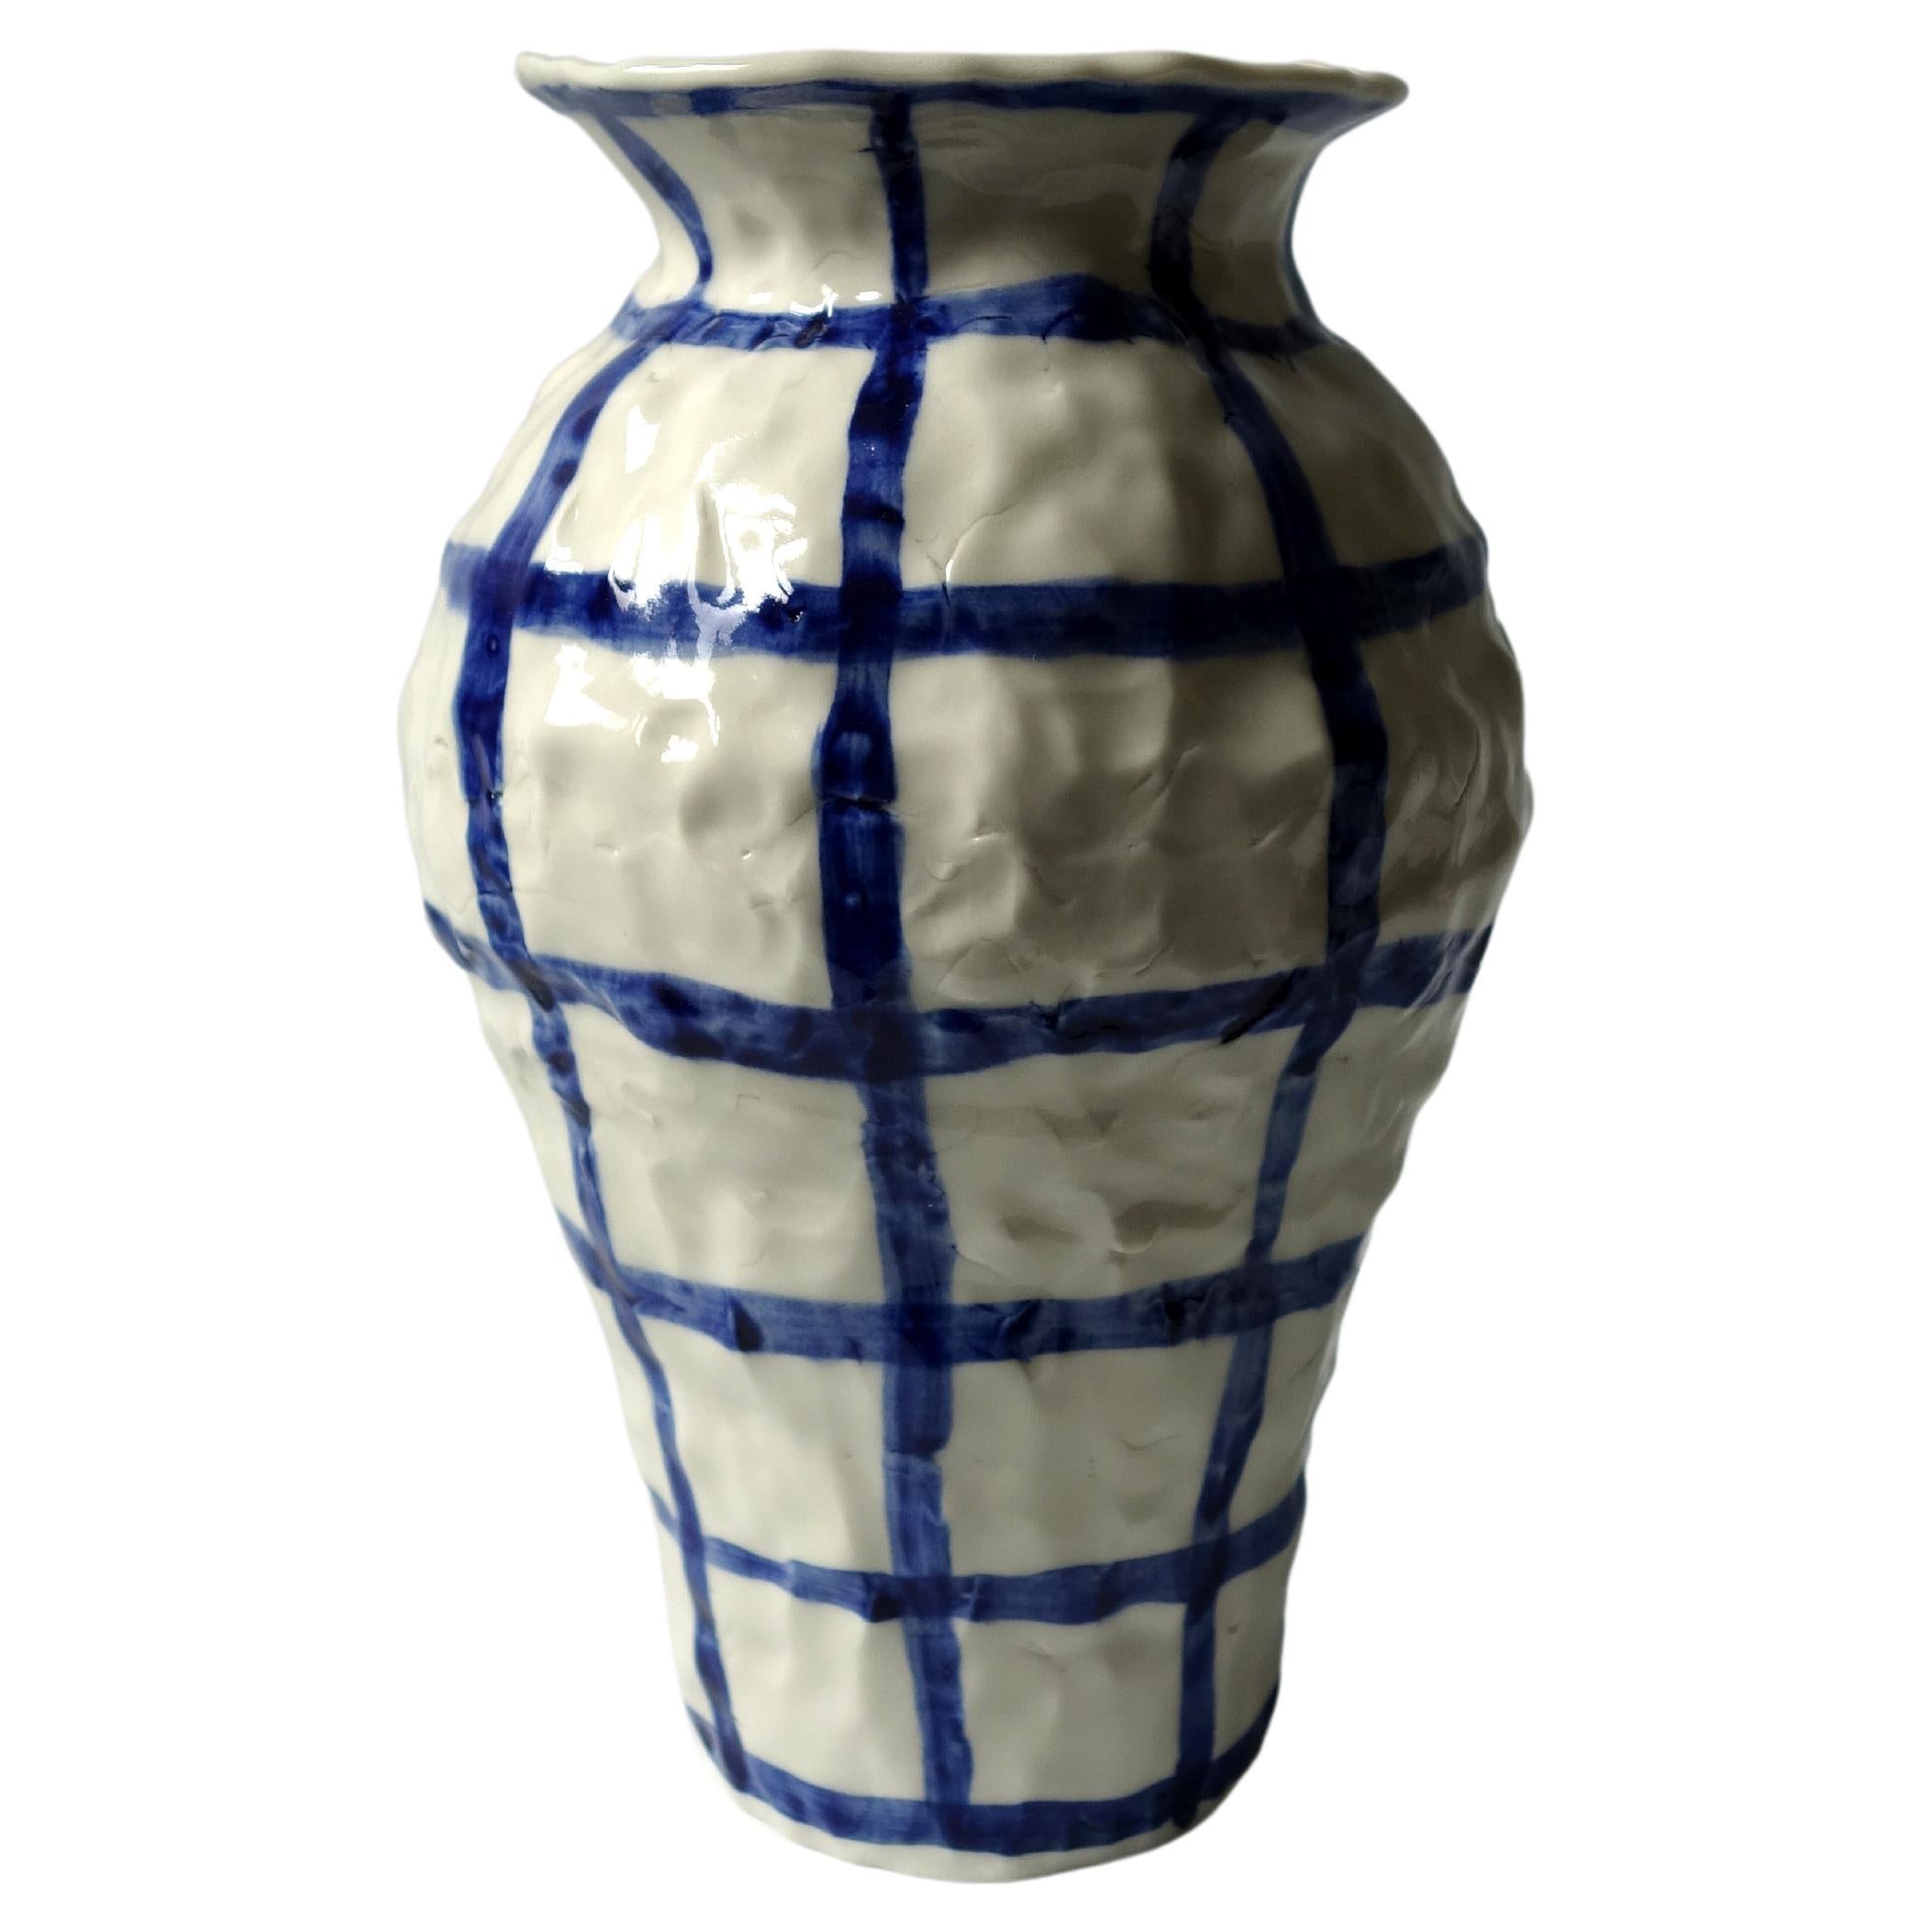 Vase with Checkers by Caroline Harrius